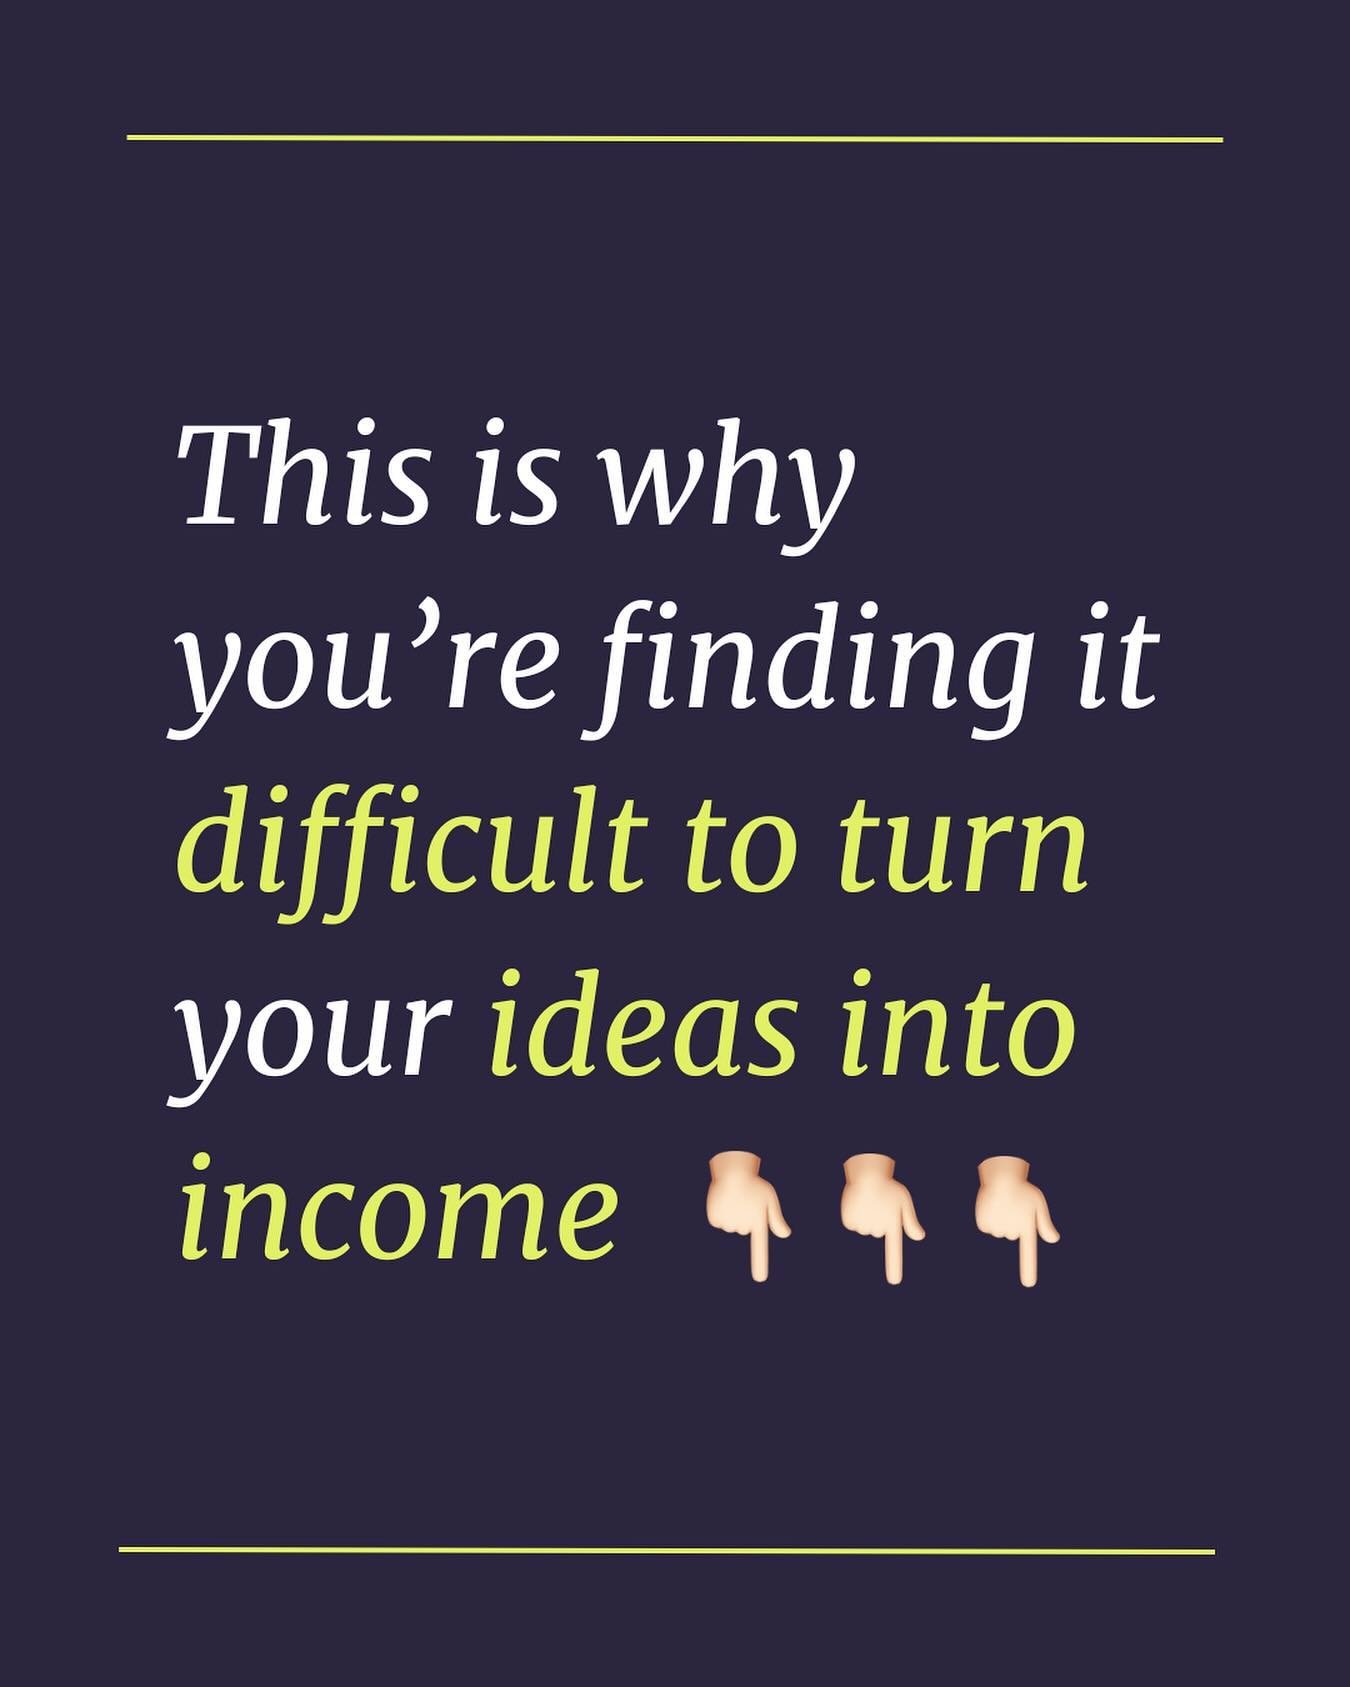 You&rsquo;ve got the ideas for new programs or 1:1 offer, but the thought of setting up systems and tech is overwhelming 🫠

Your success isn&rsquo;t going to come from mastering spreadsheets or funnels - it comes from doing what you&rsquo;re best at